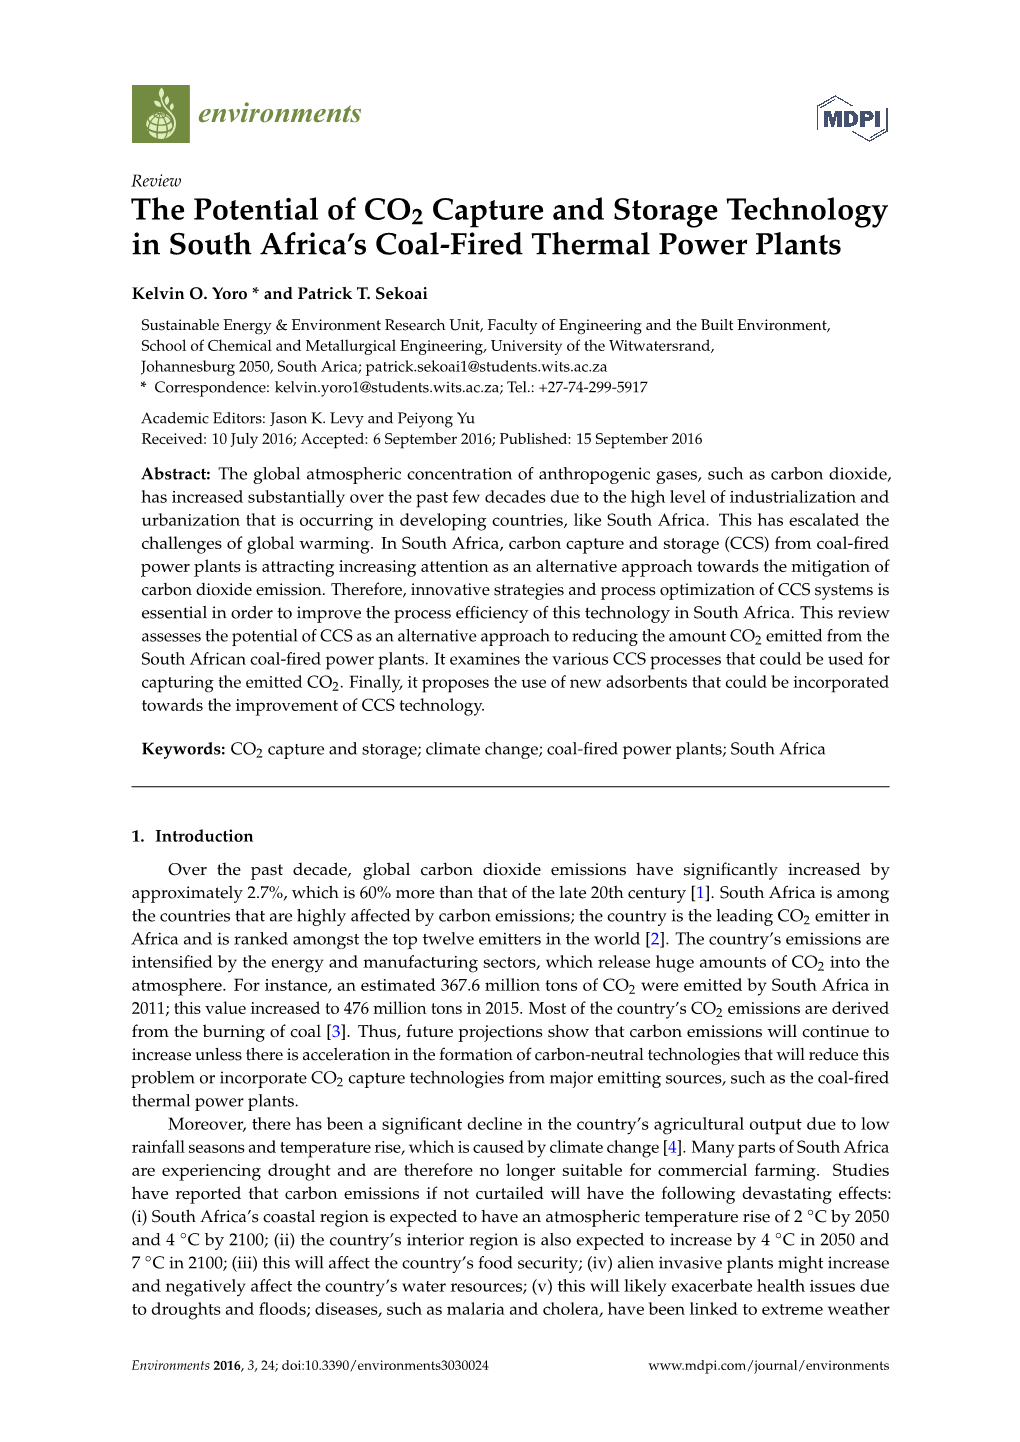 The Potential of CO2 Capture and Storage Technology in South Africa’S Coal-Fired Thermal Power Plants